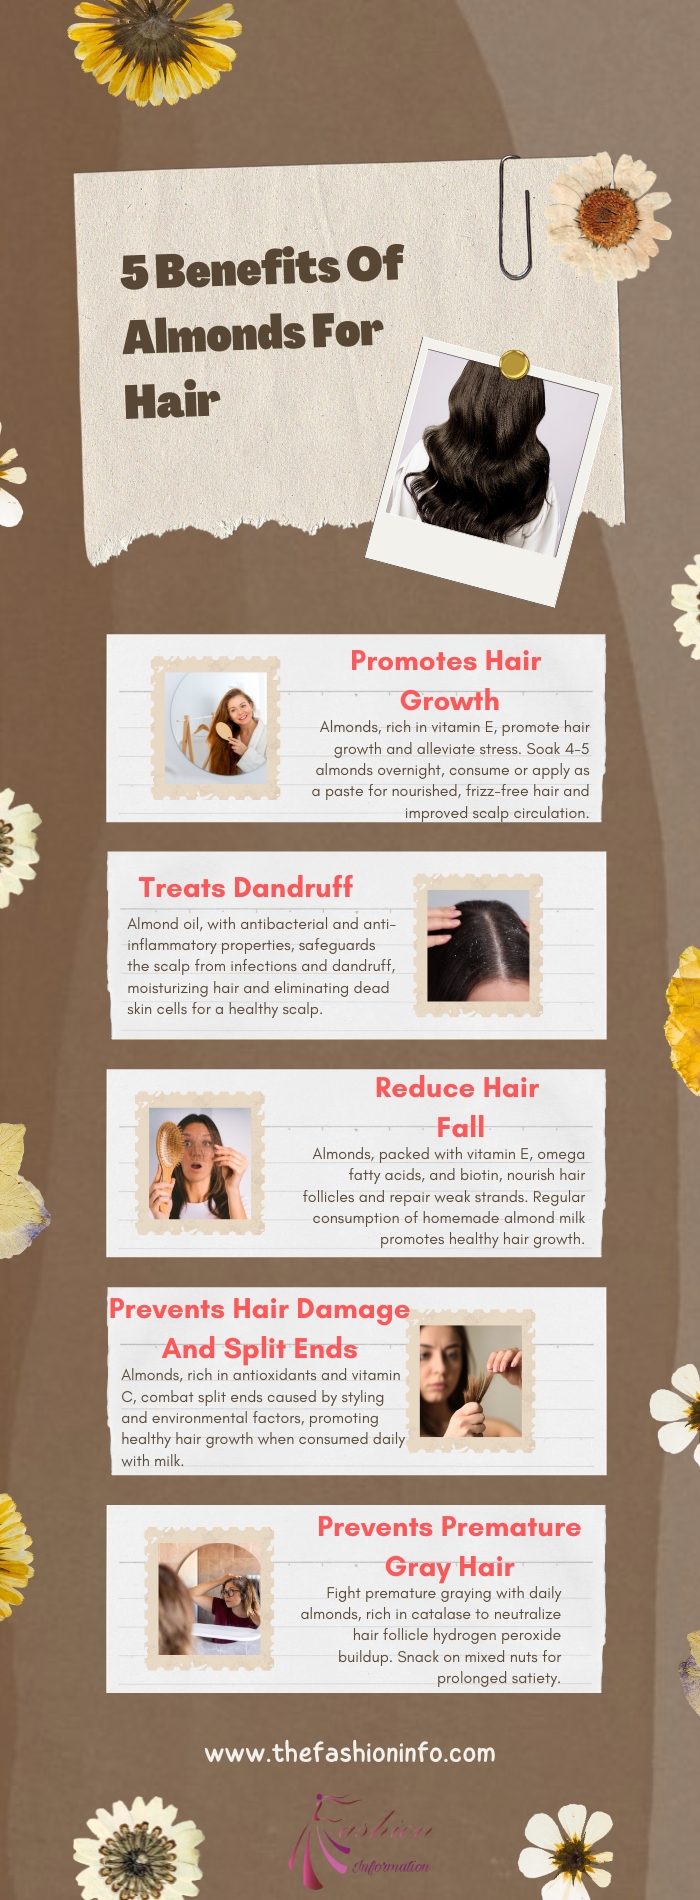 5 Benefits Of Almonds For Hair